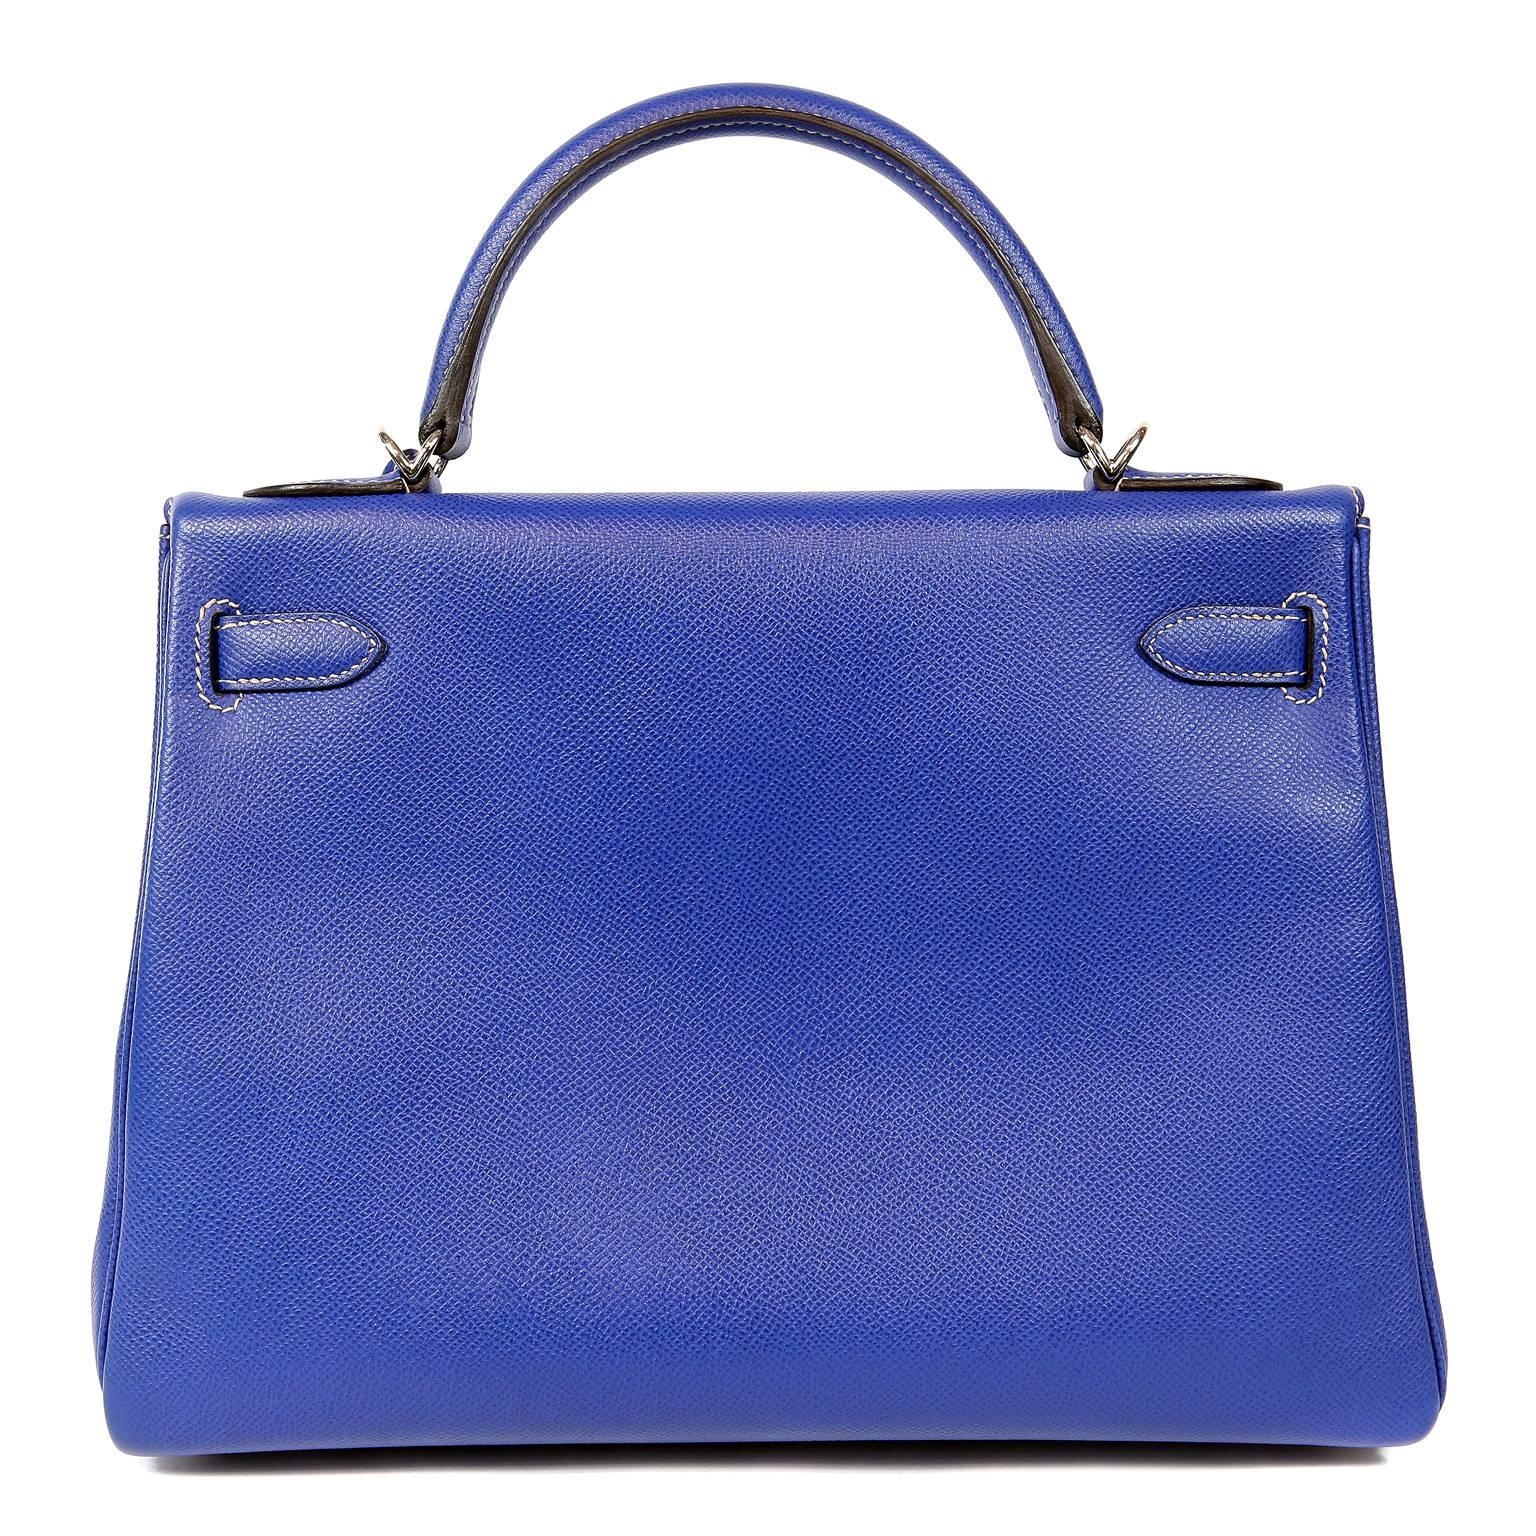 Hermès Bleu Electrique 32 cm Epsom Bi Color Kelly- Pristine Condition
Hermès bags are considered the ultimate luxury item worldwide.  Each piece is handcrafted with waitlists that can exceed a year or more. From the Candy Collection, this rare Kelly